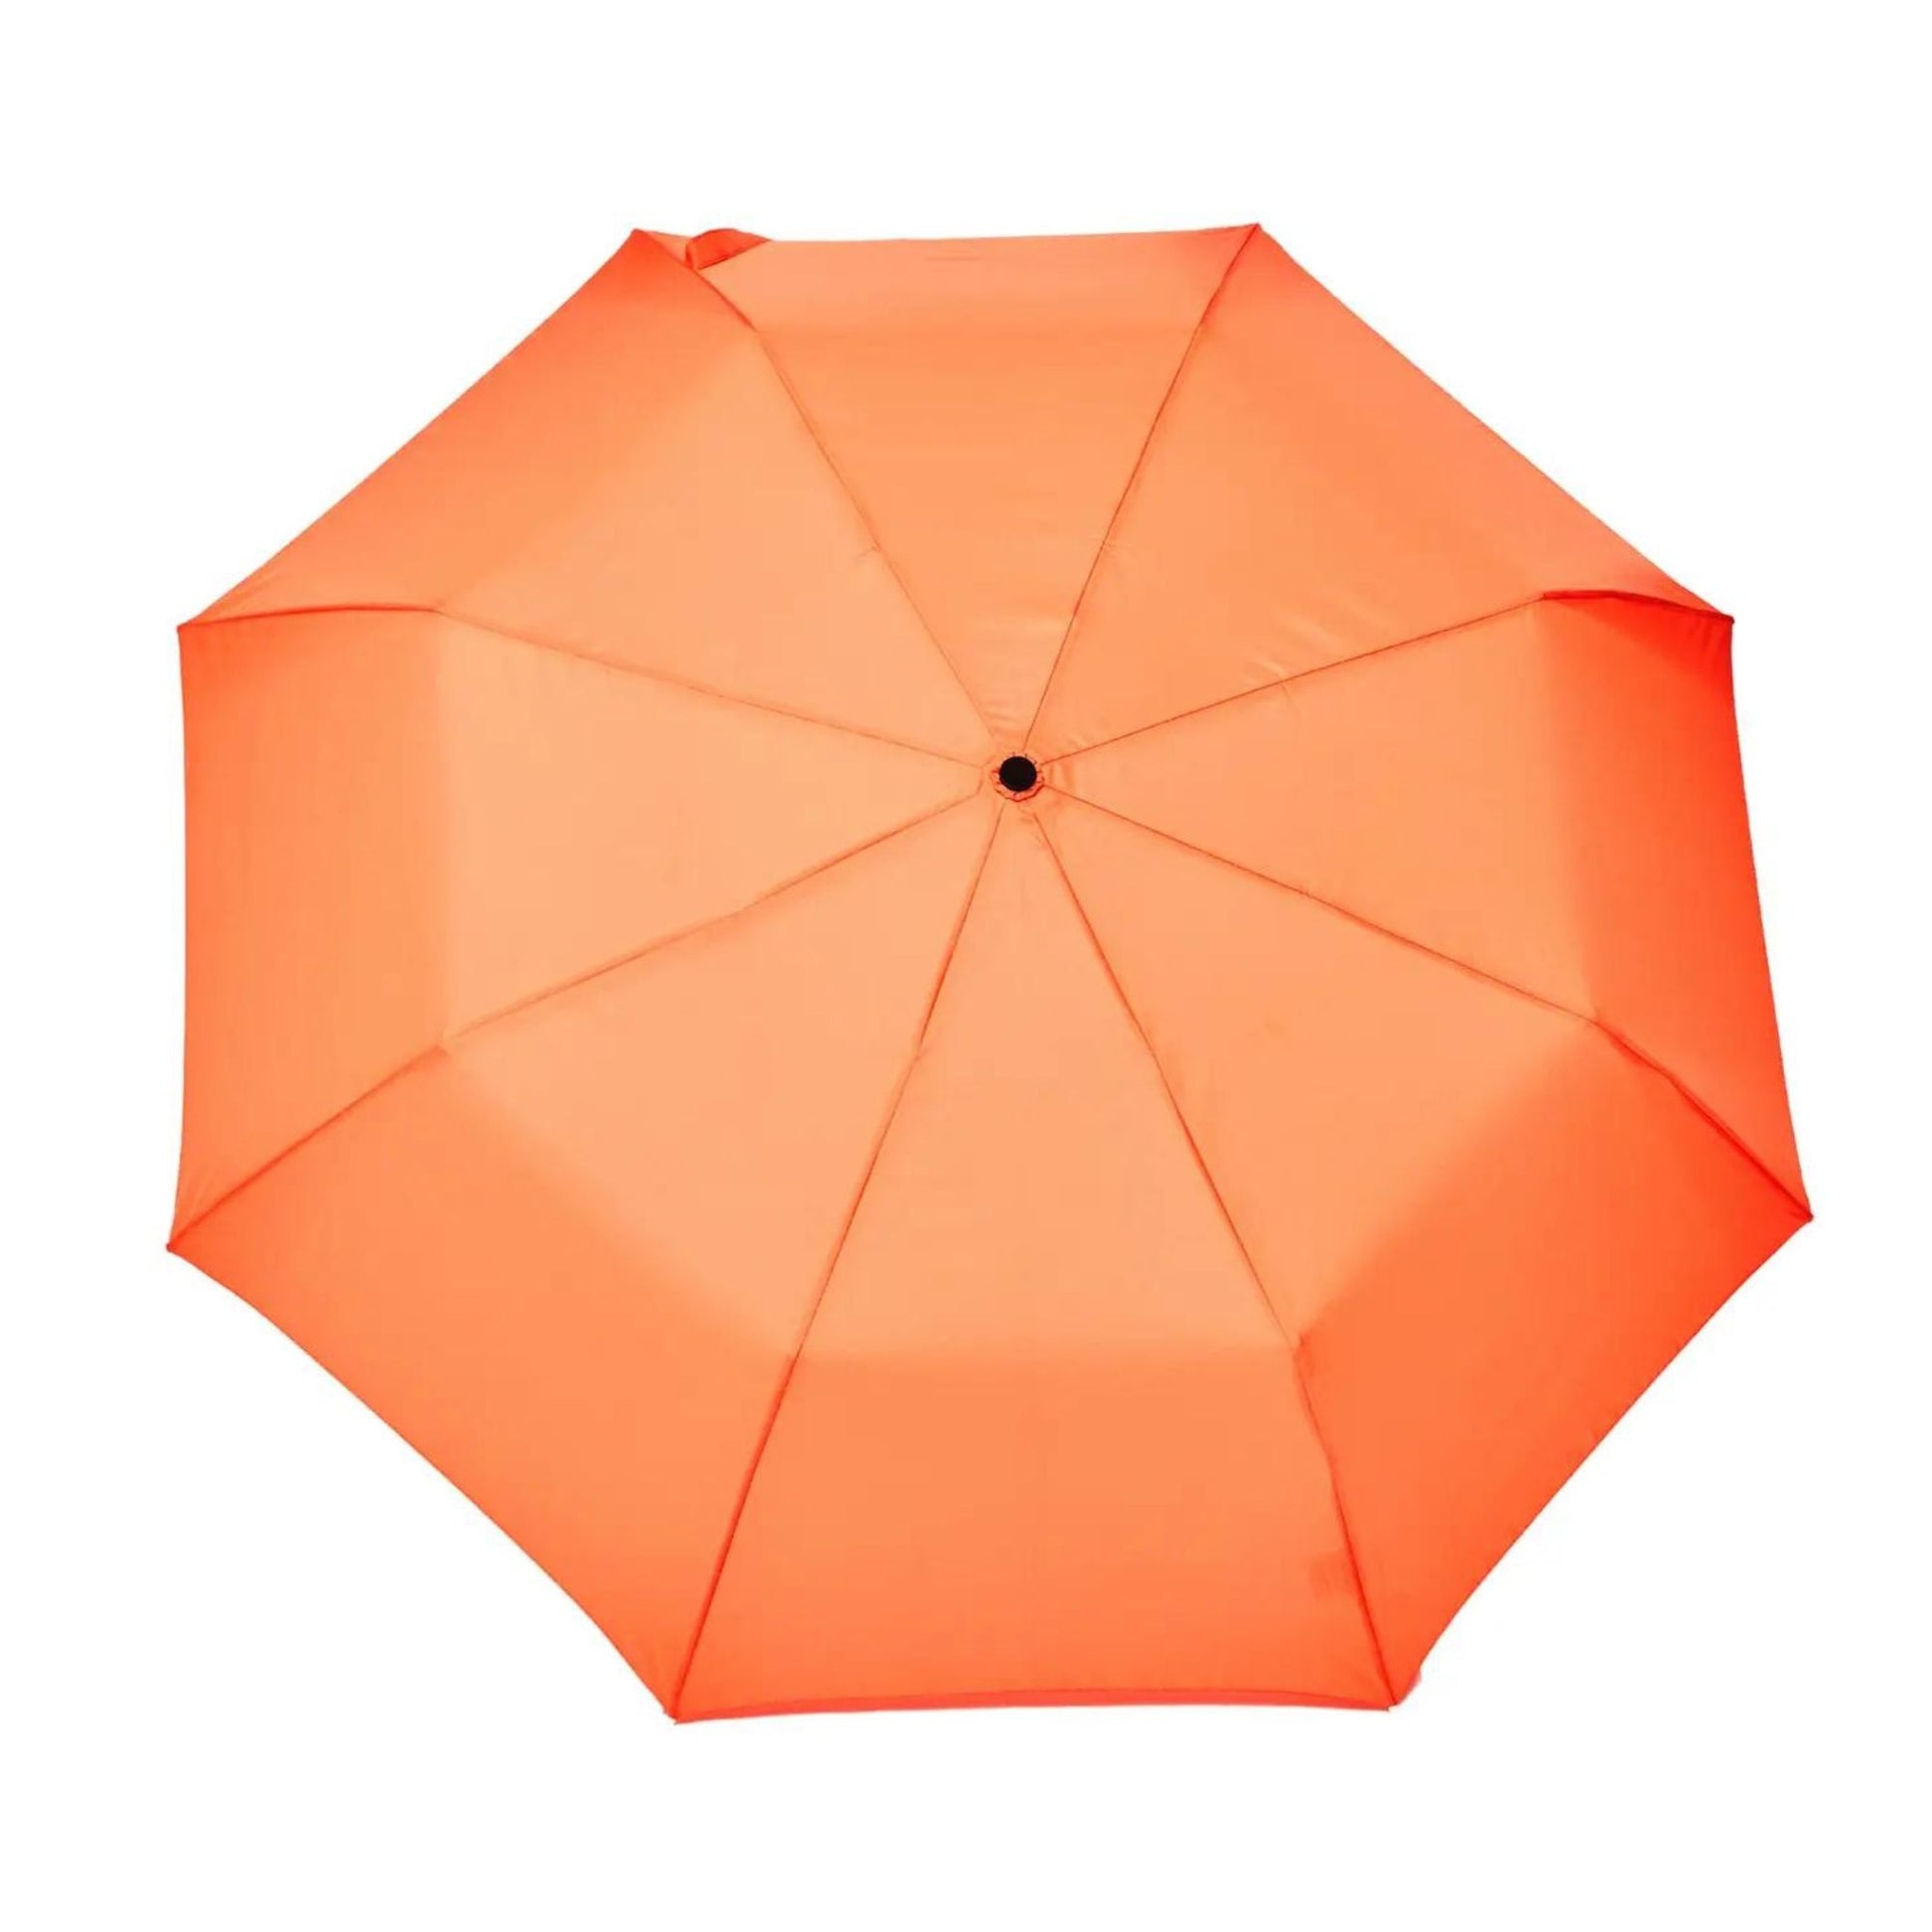 Wide open umbrella in peach with birchwood handle in the shape of duck head